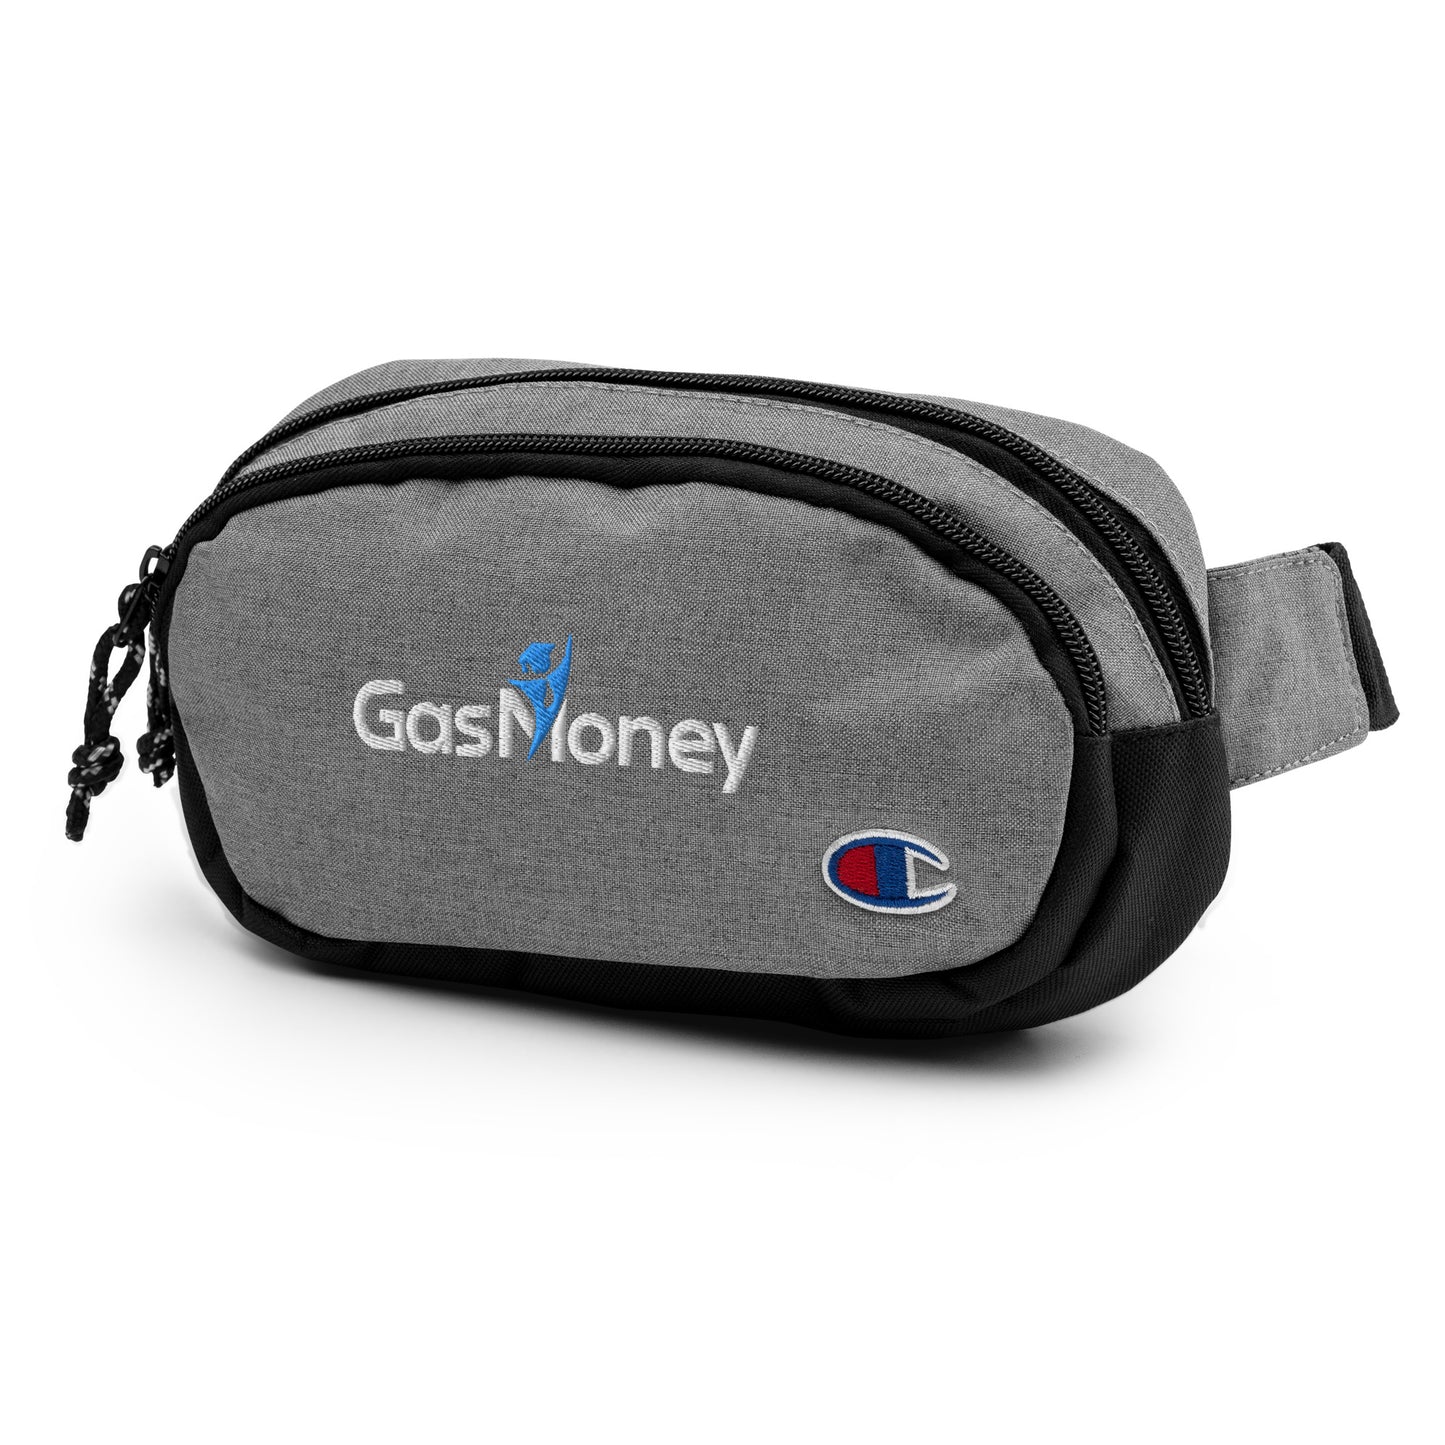 Gas Money Fanny Pack